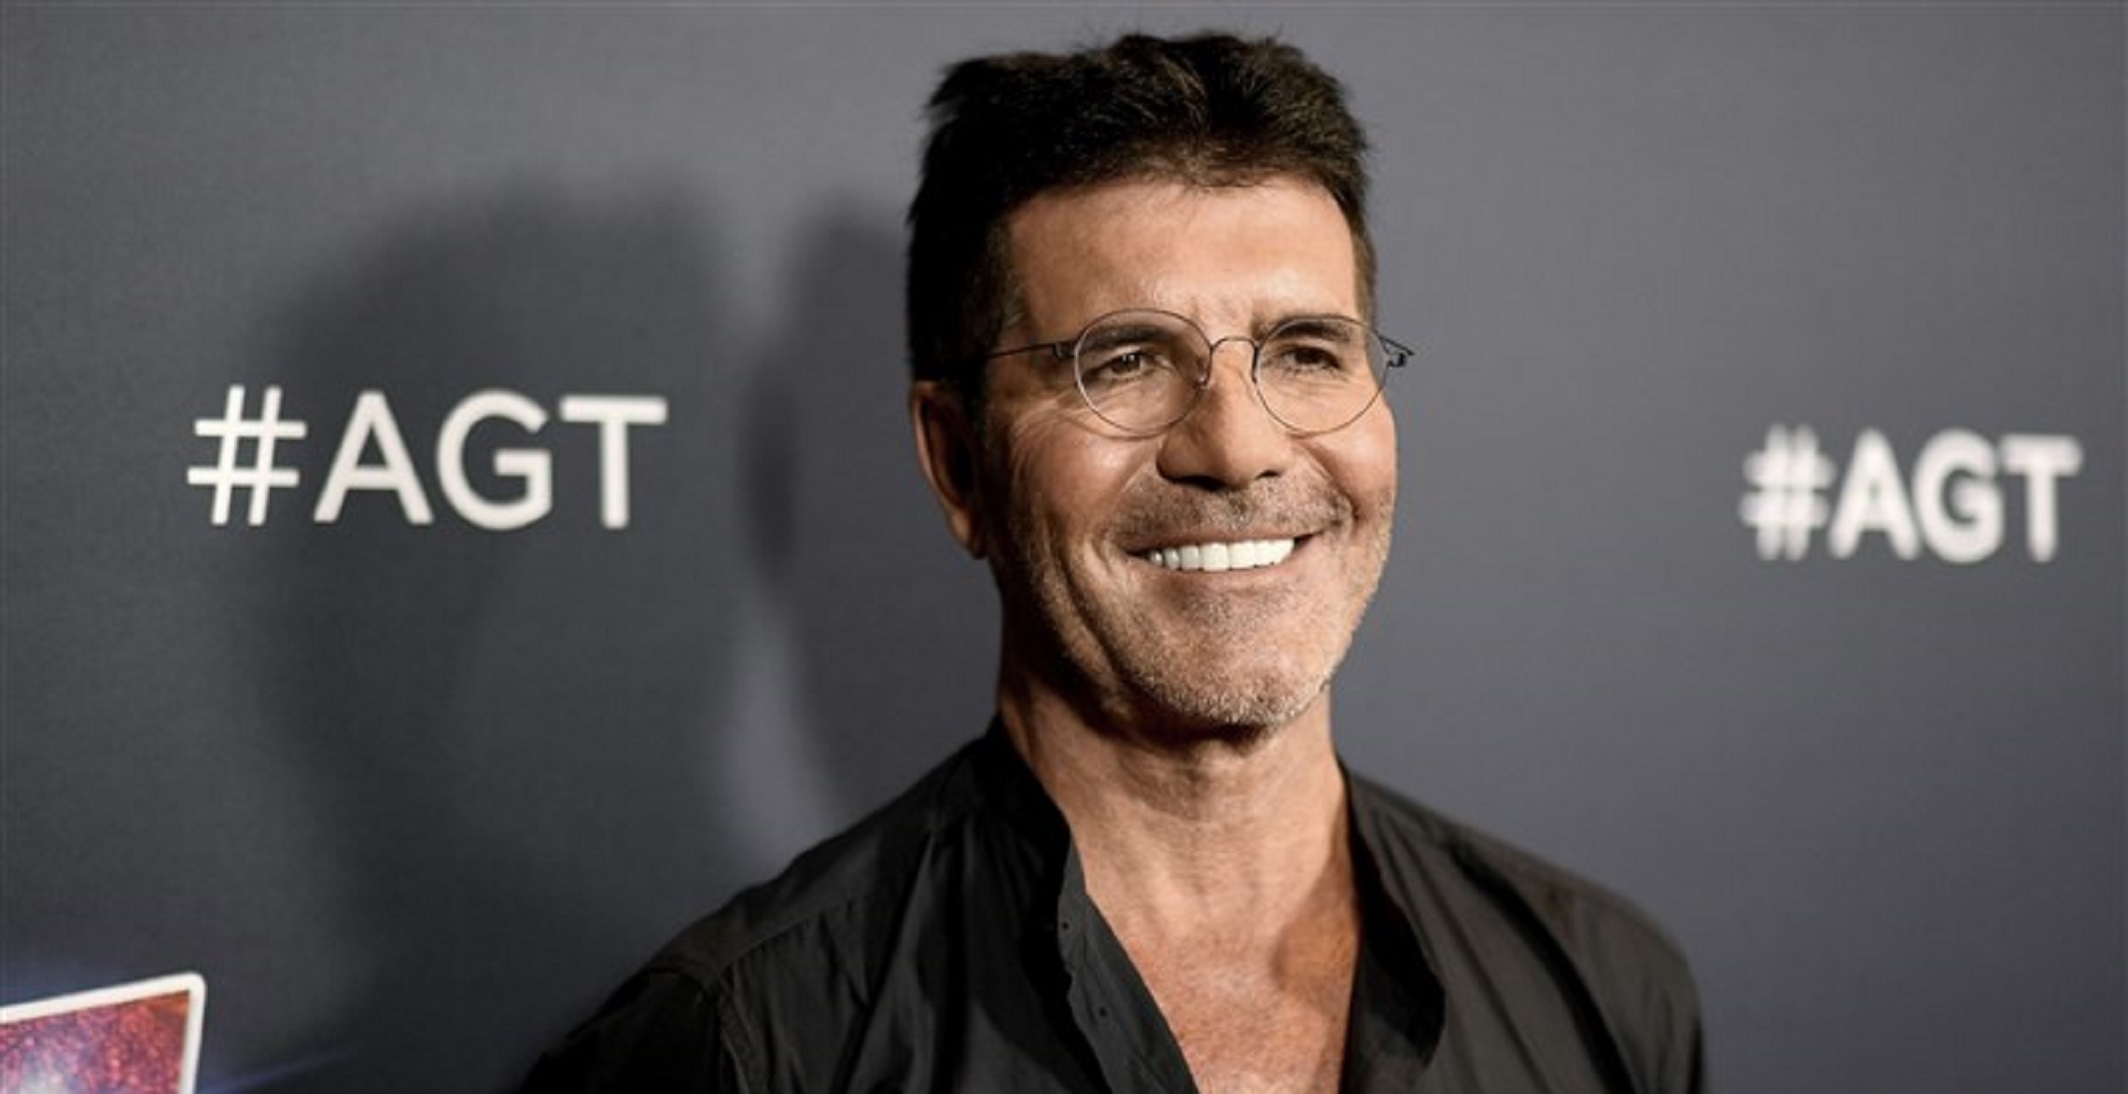 Simon Cowell Hospitalized After Bike Accident, Breaks Back